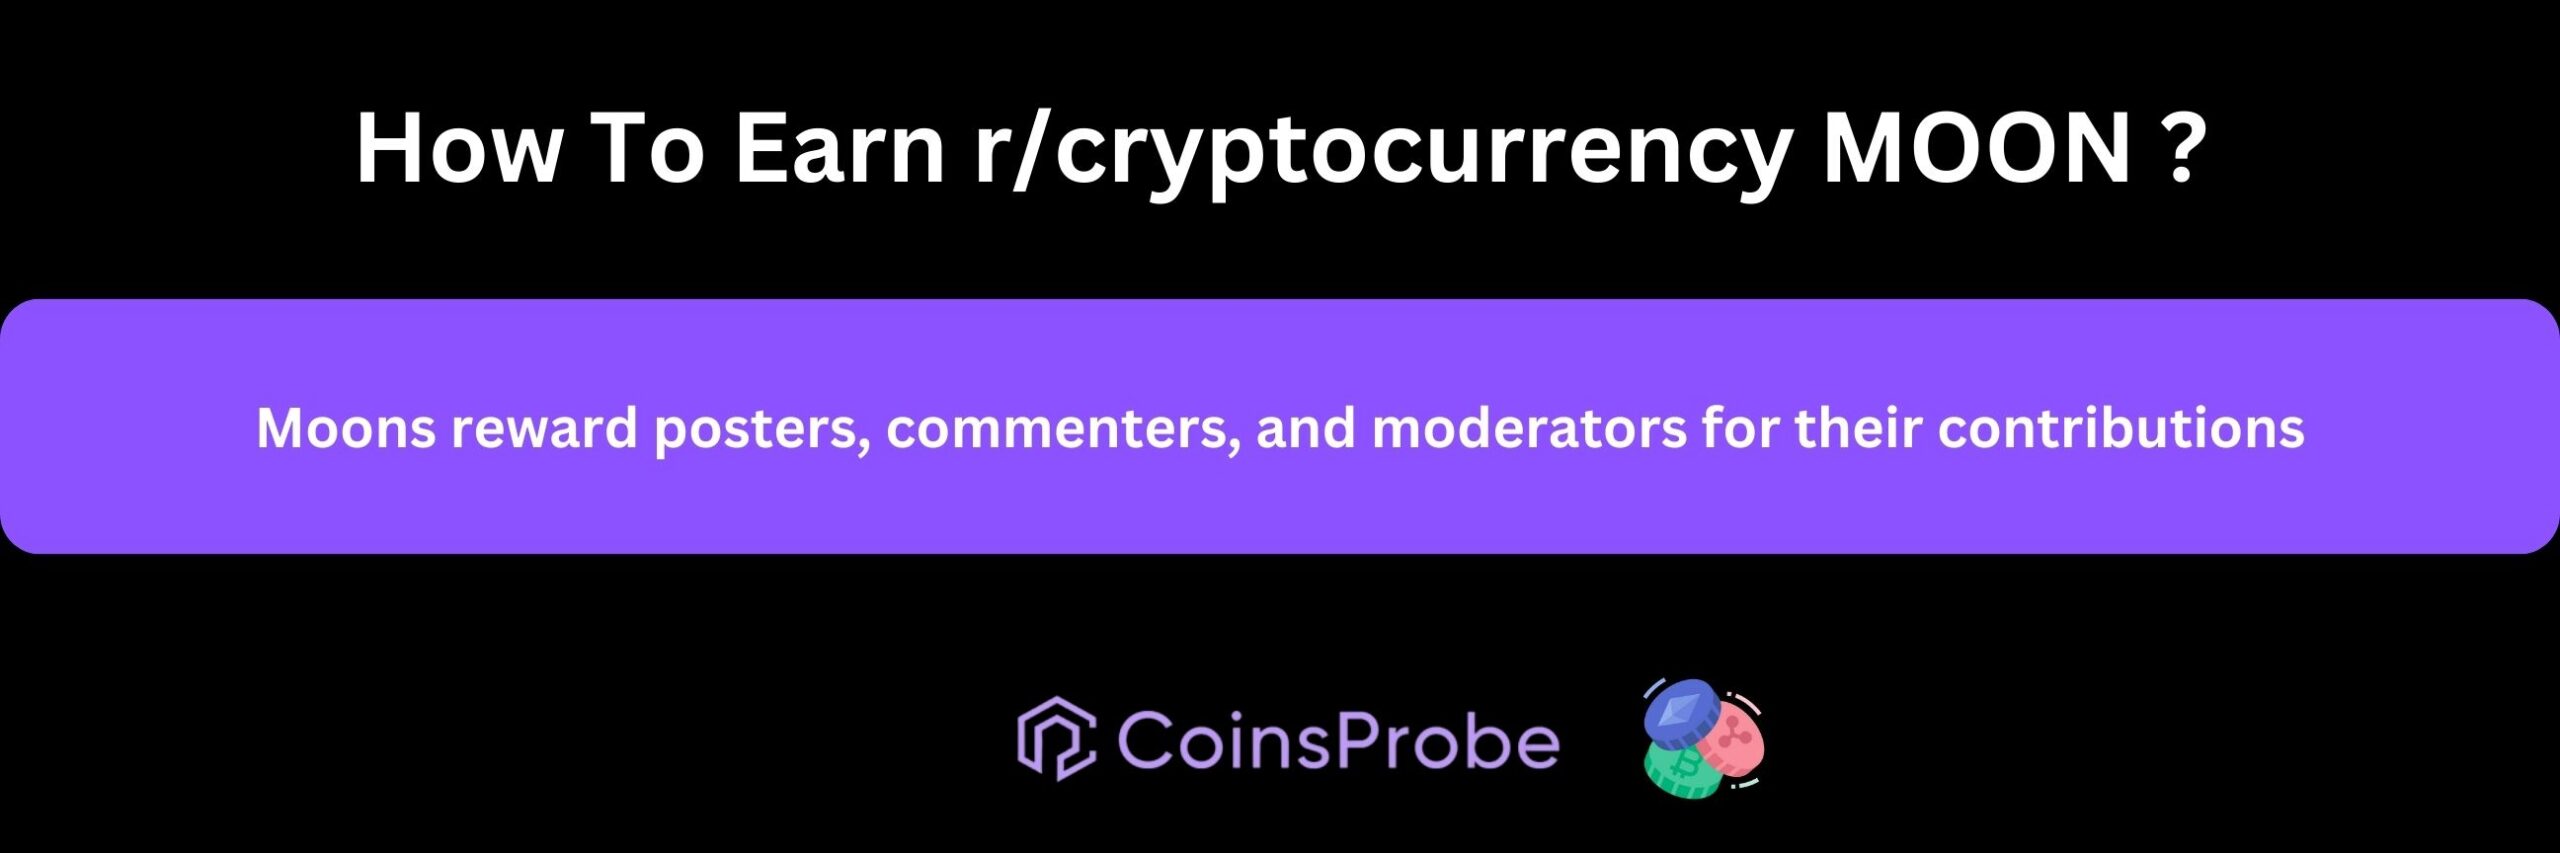 How To Earn r/cryptocurrency MOON 